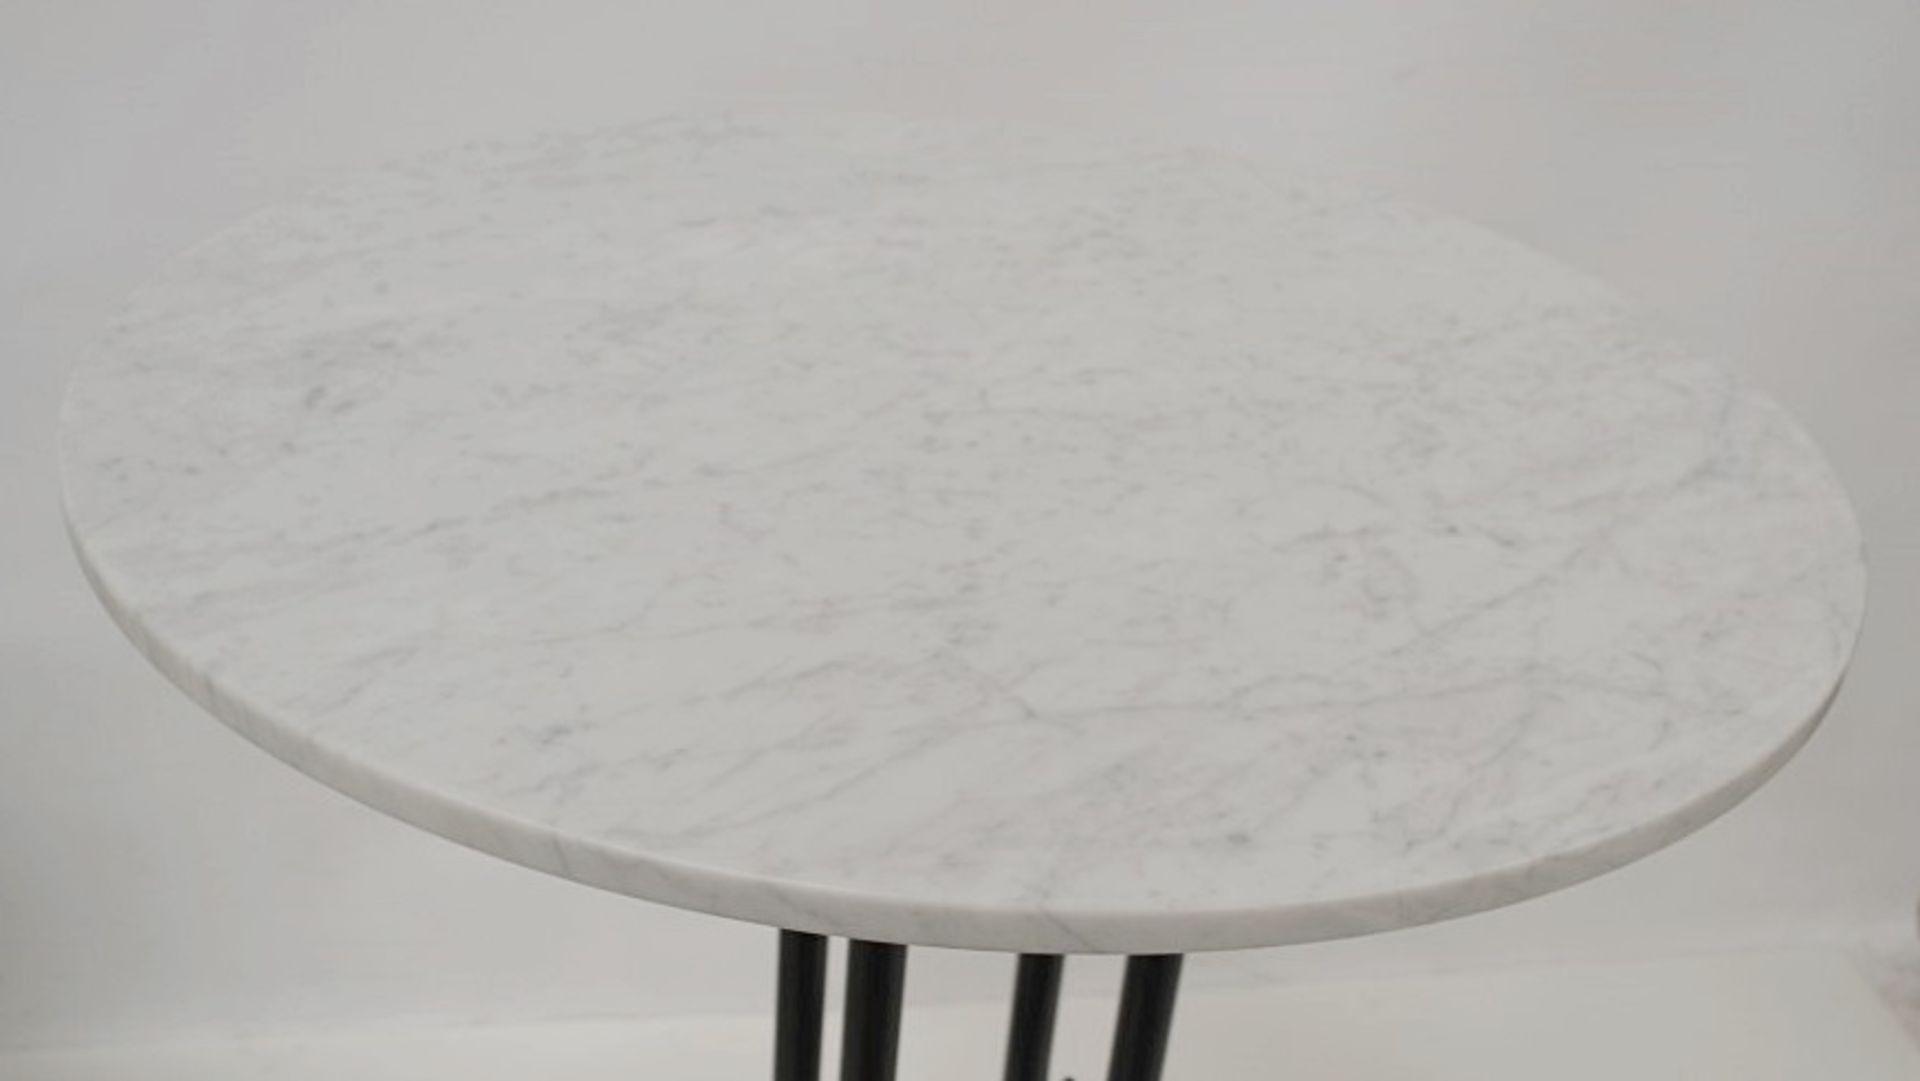 1 x GUBI 'TS Column' Designer Bar Table With A Carrera White Marble Top And Base - RRP £1,230.00 - Image 3 of 4